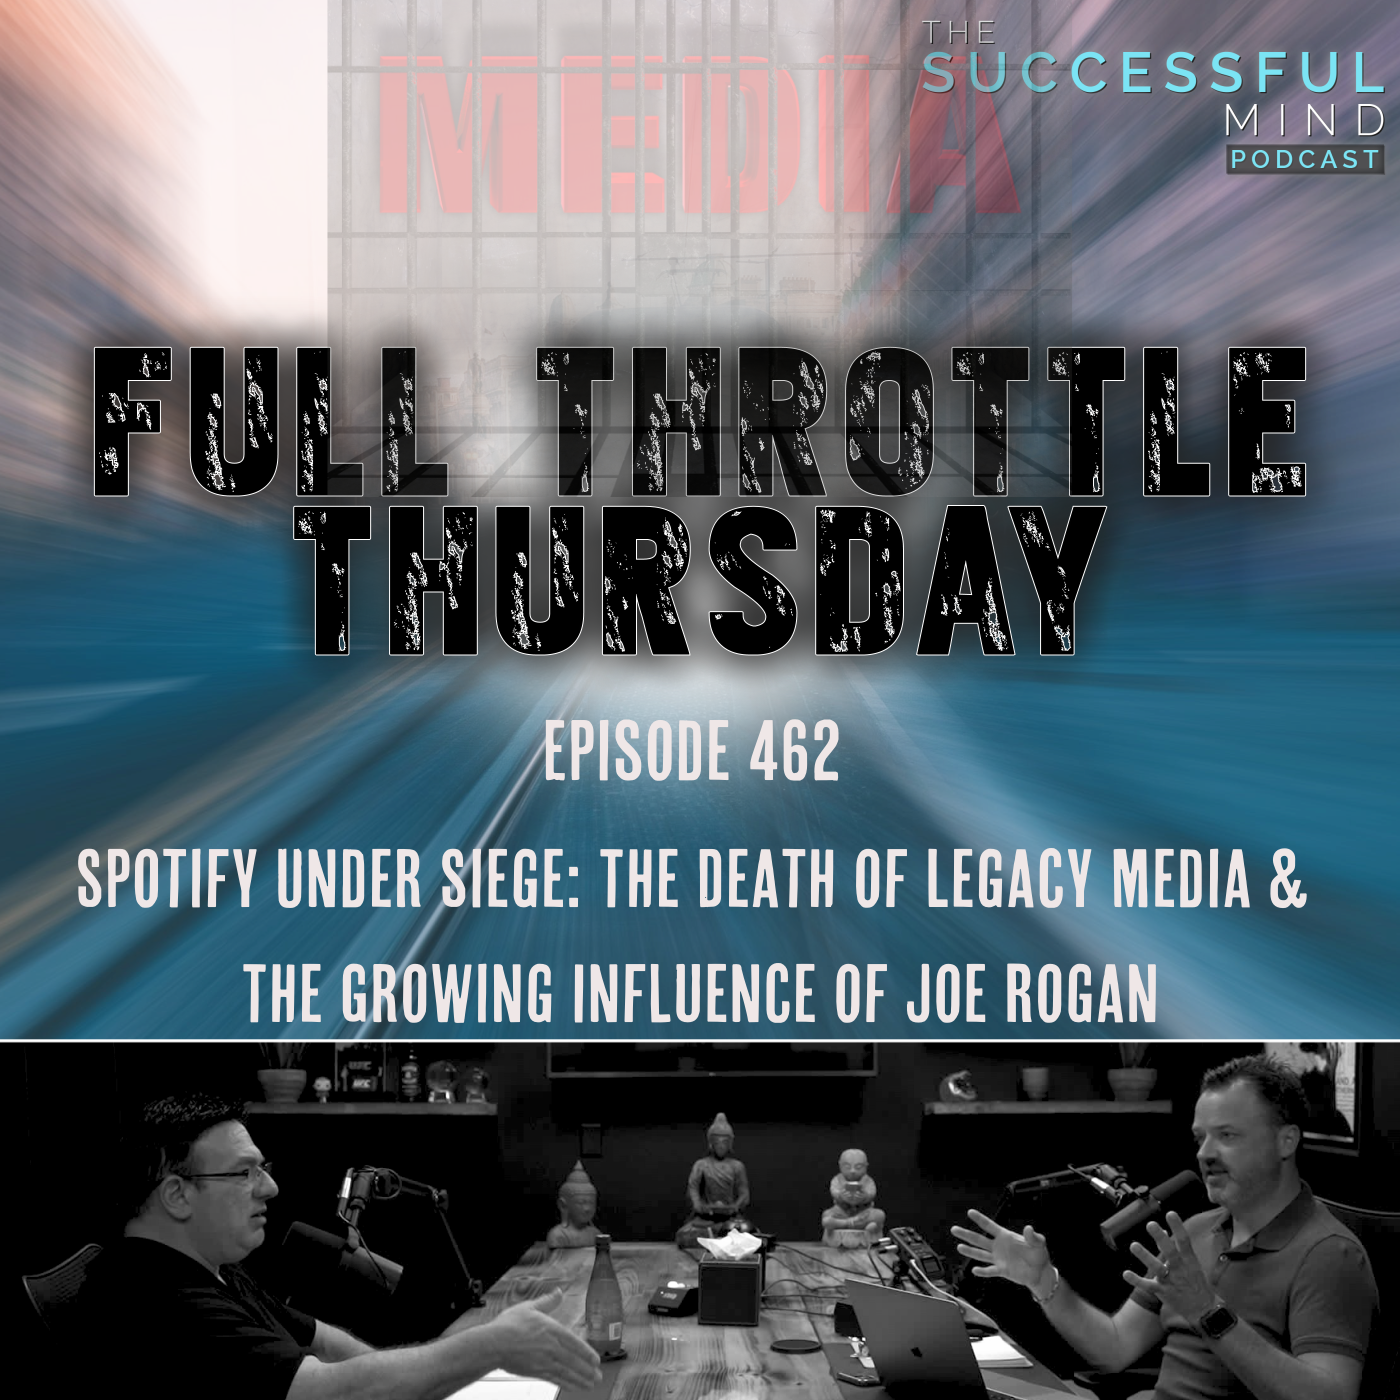 The Successful Mind Podcast - Full Throttle Thursday - Spotify Under Siege: The Death of Legacy Media & The Growing Influence of Joe Rogan